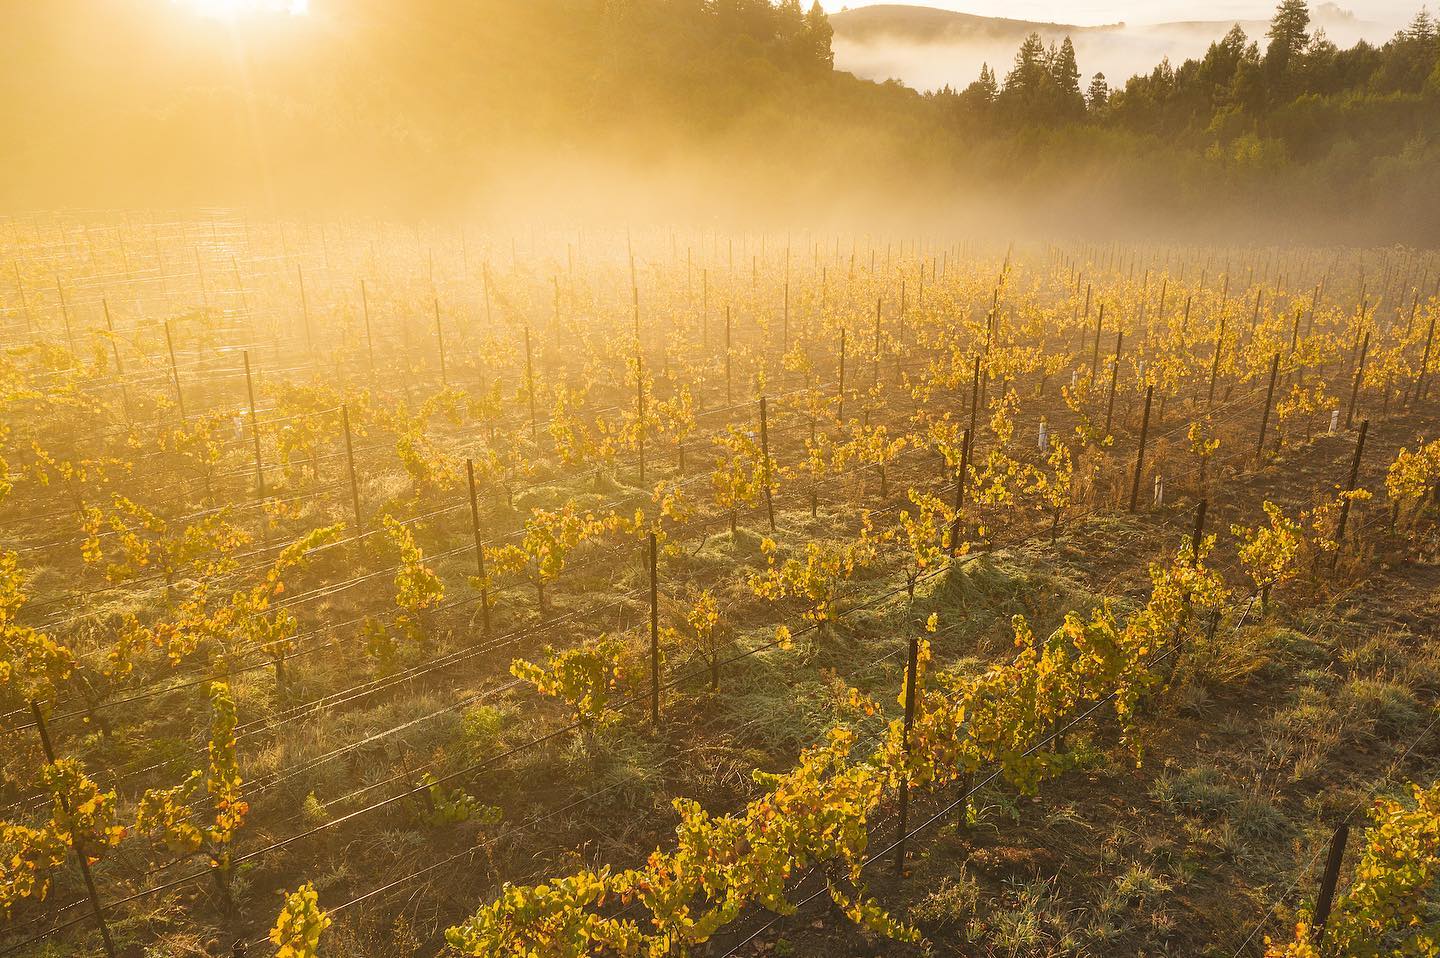 Fog rolling into the vineyard at sunset